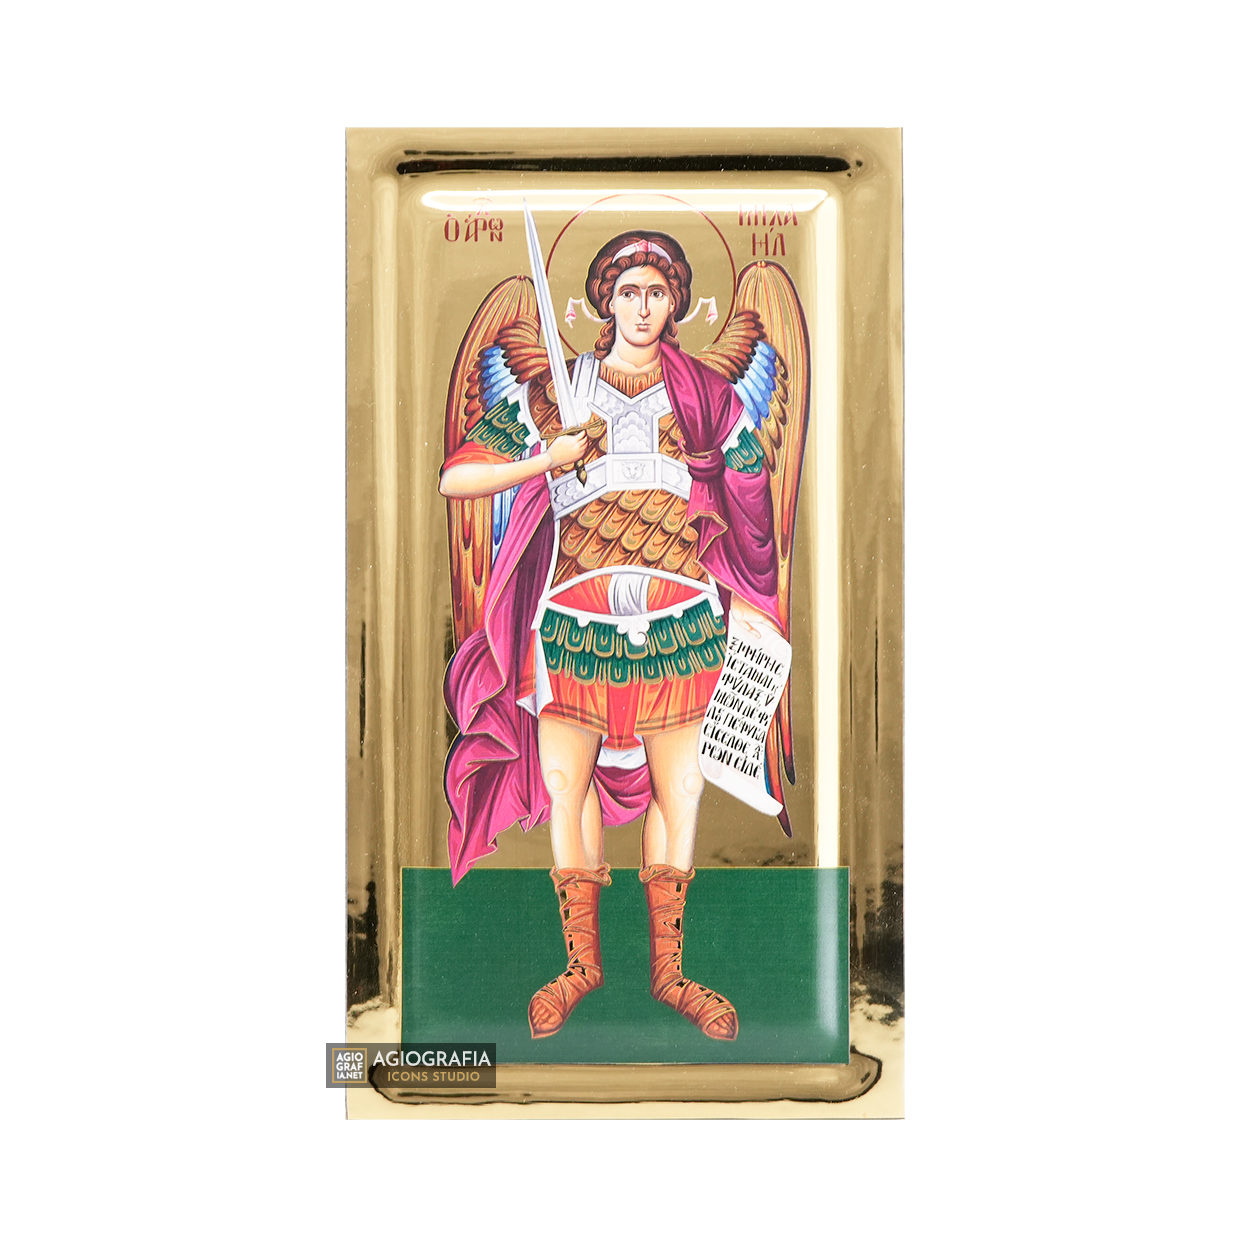 Archangel Michael Christian Icon with Gilding Effect background